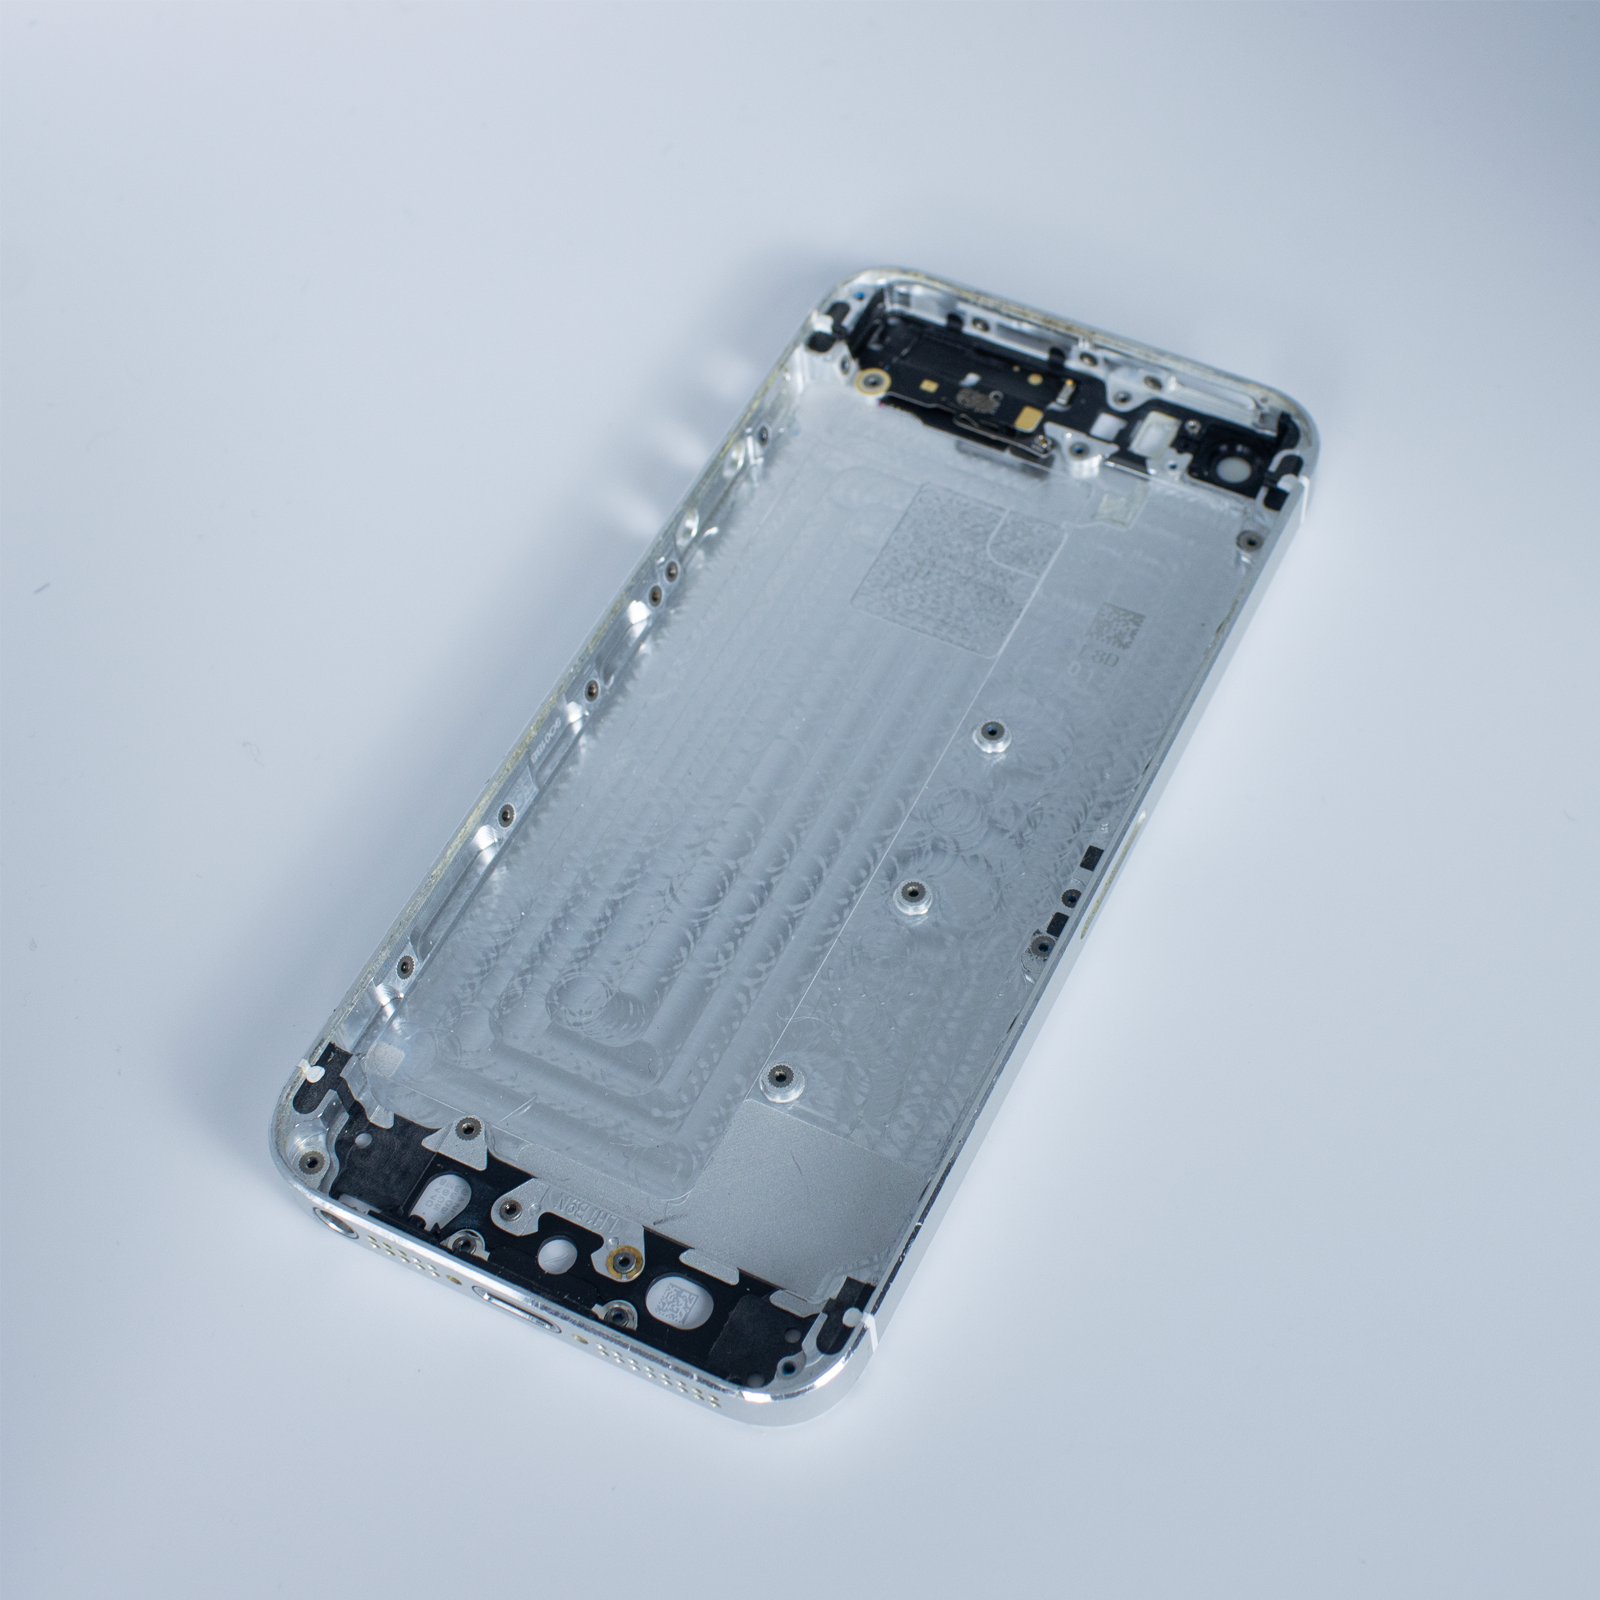 iPhone 5S - Back Housing